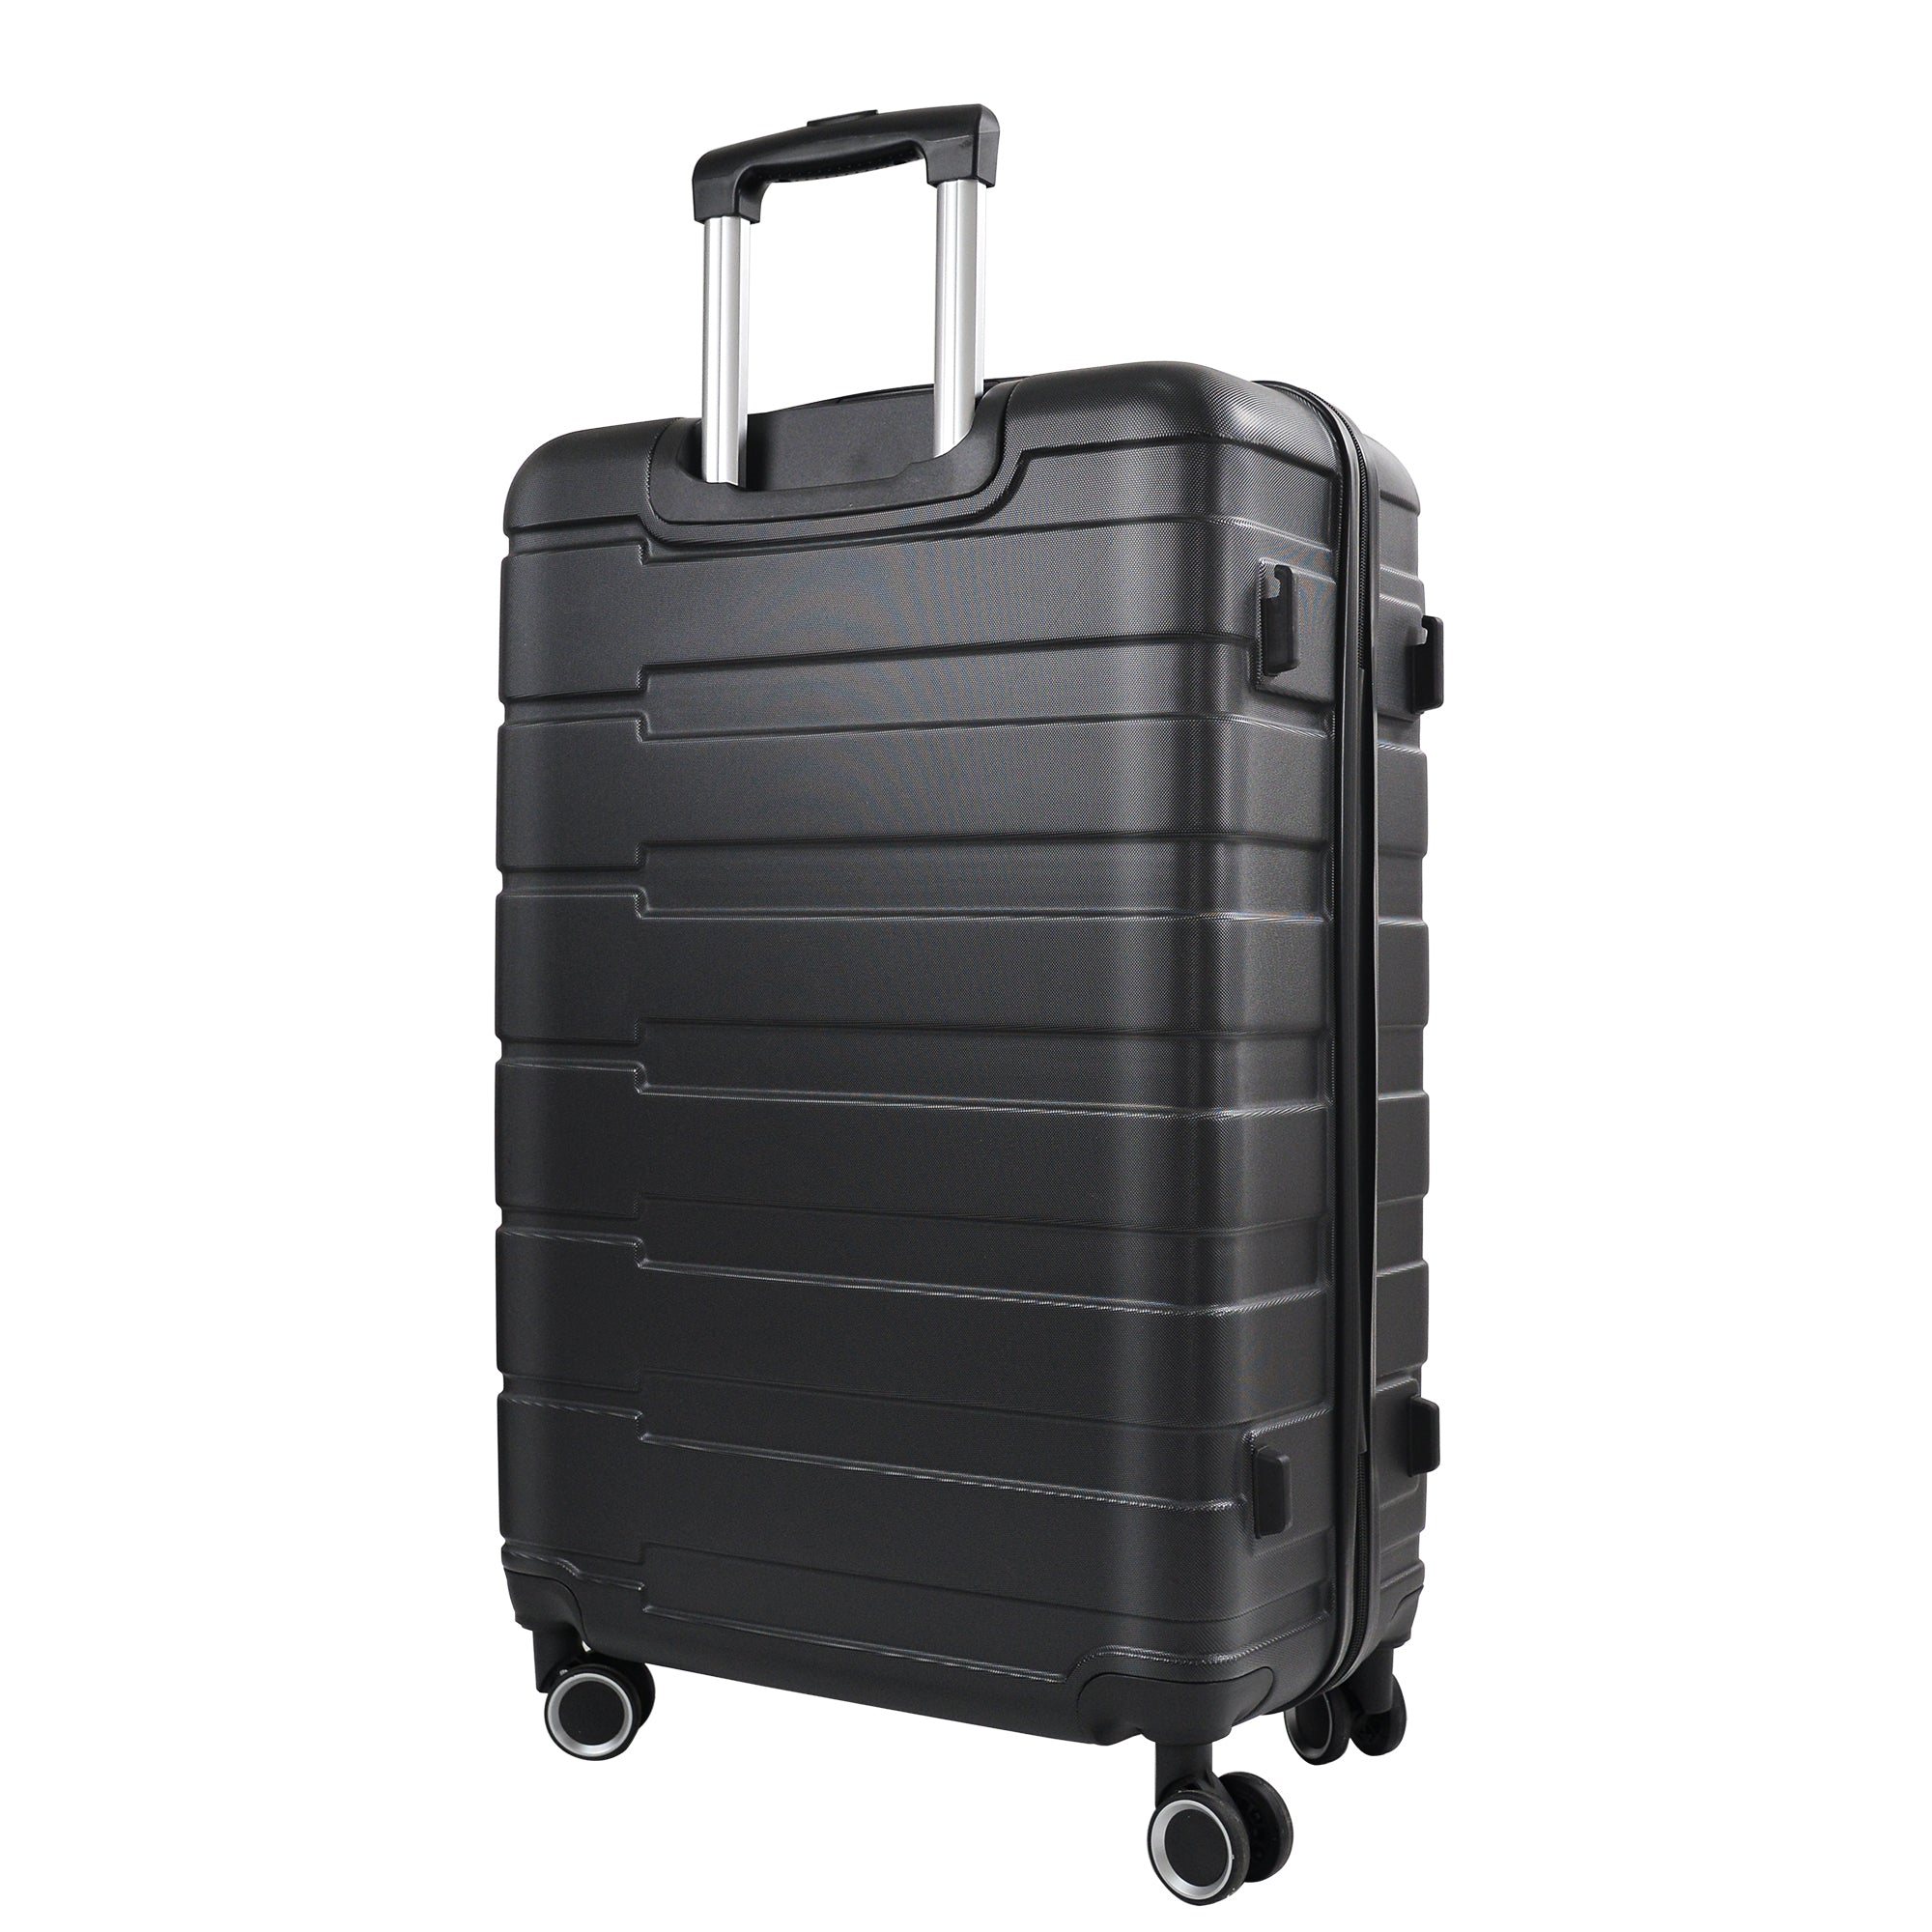 Luggage Sets 2 Piece, 20 inch 24 inch Carry on Luggage black-abs